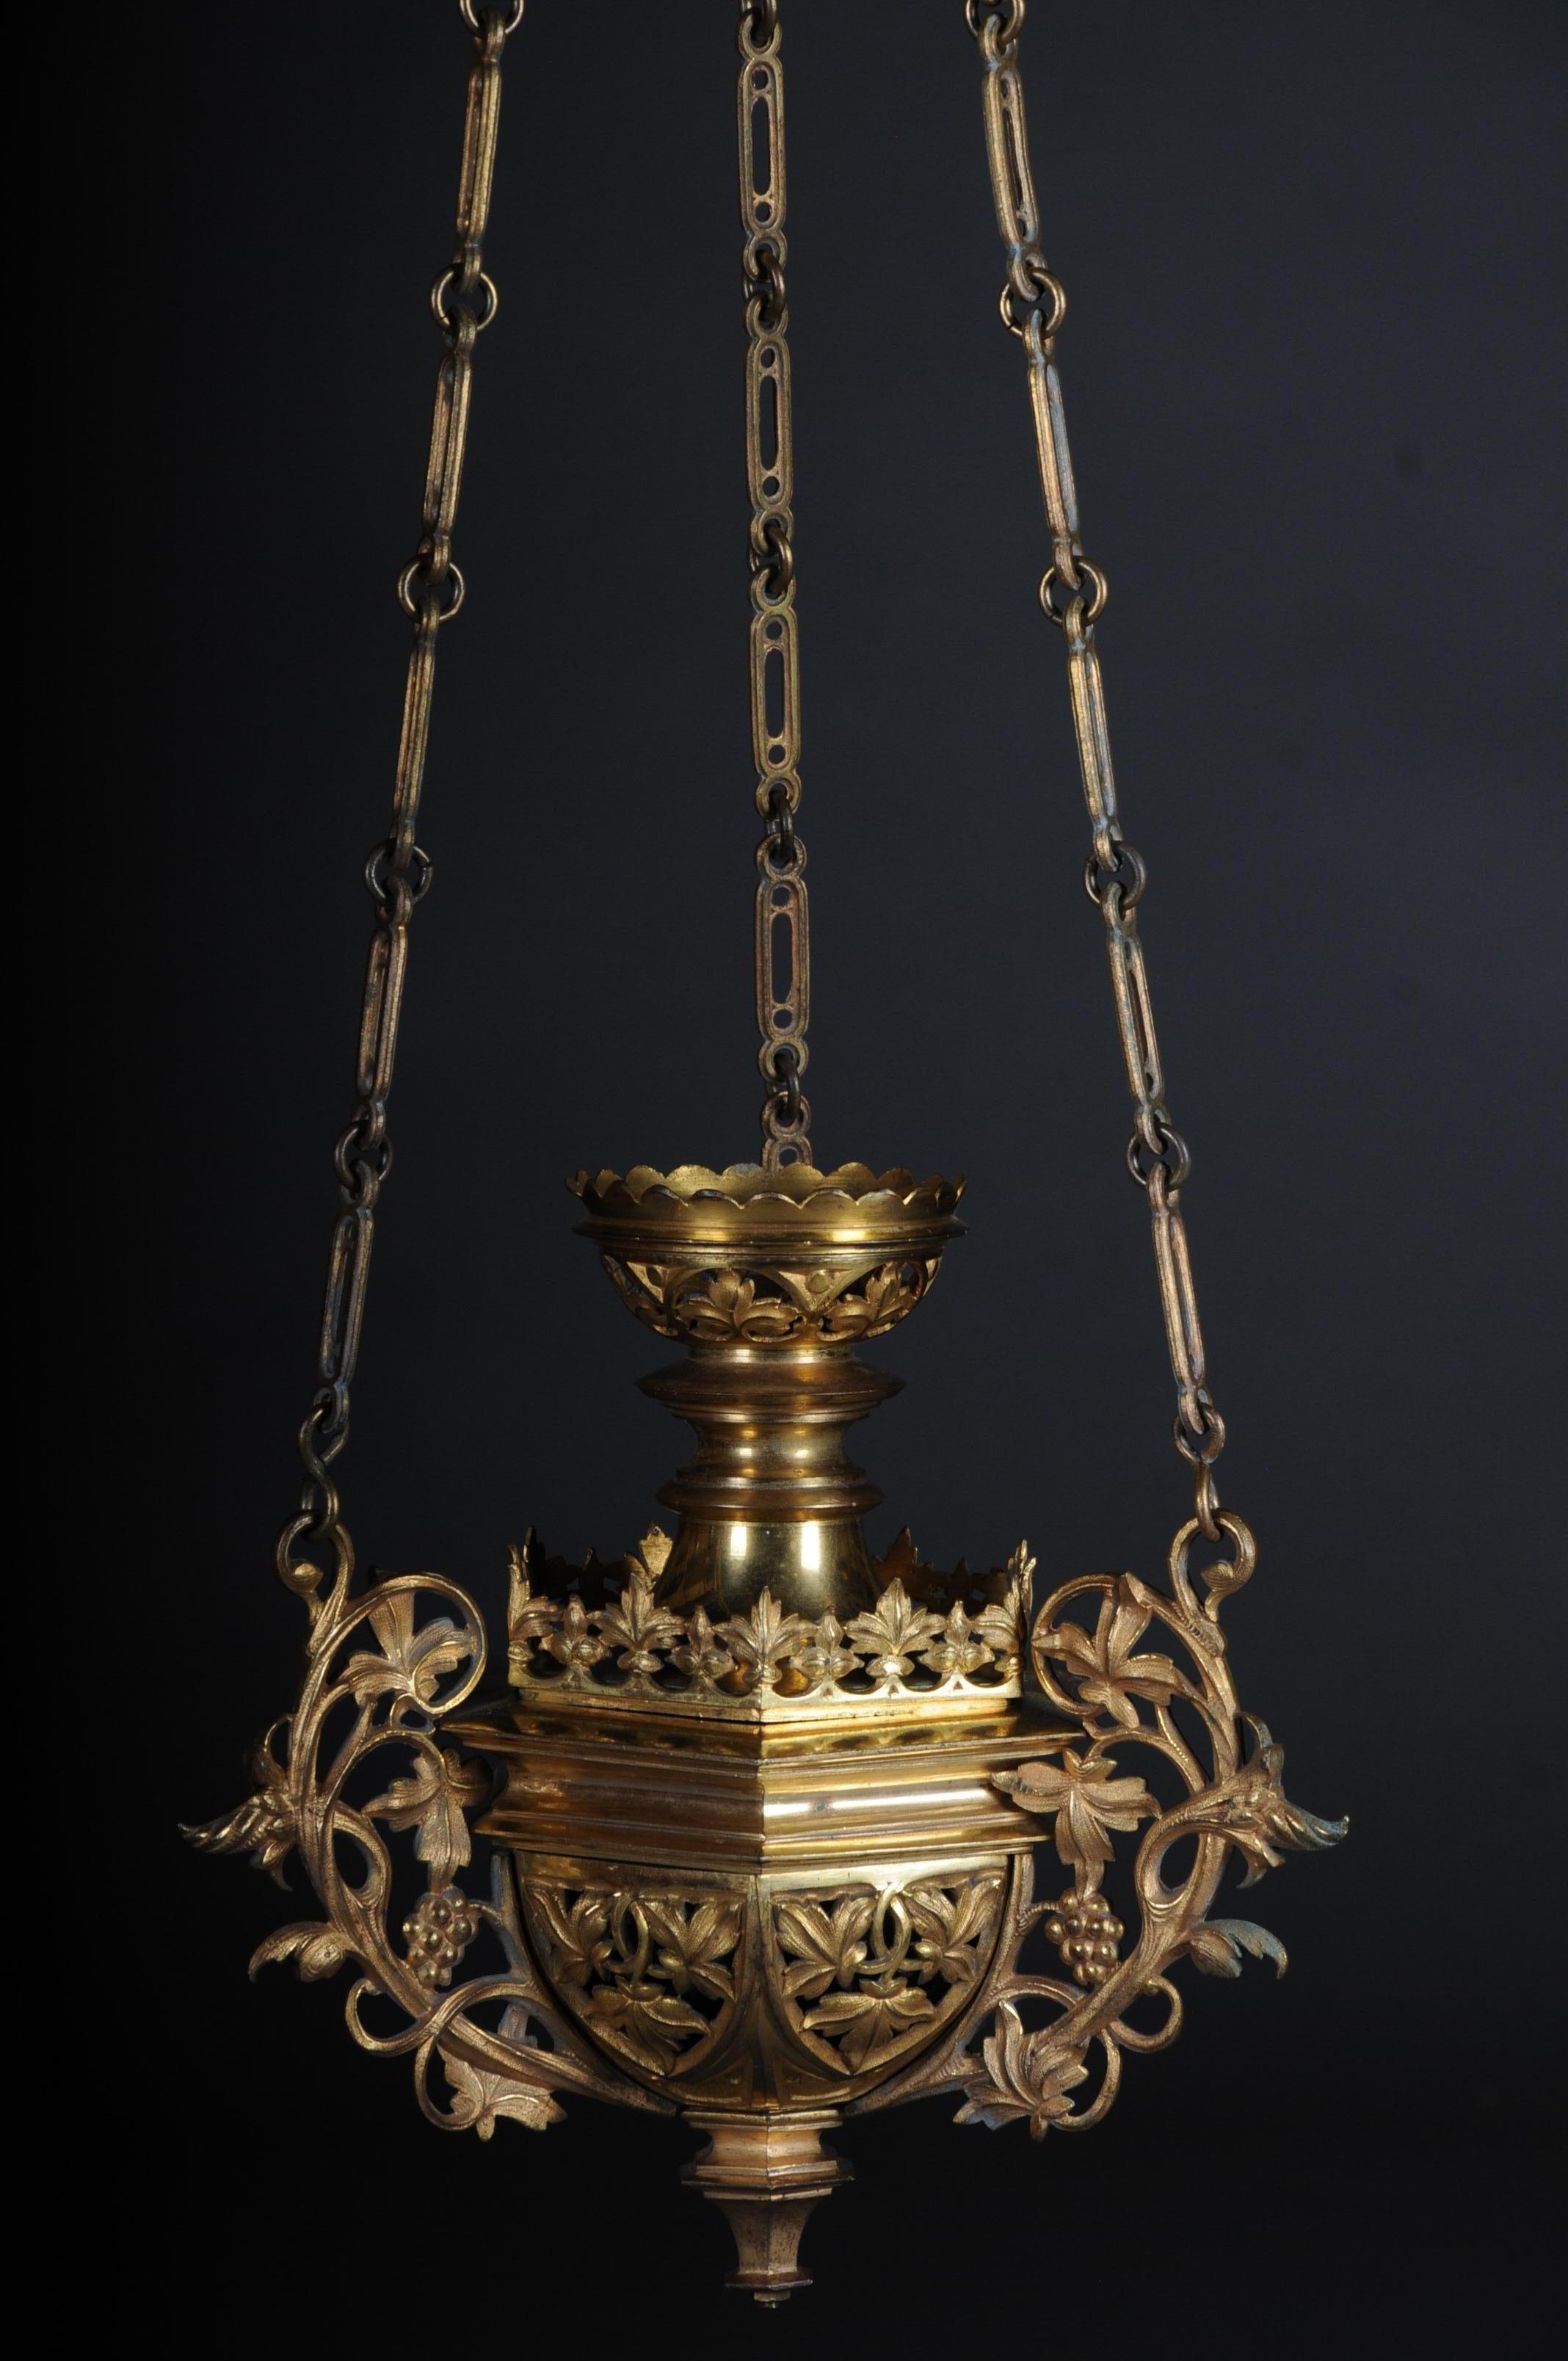 Sensational, curious incense traffic light fire-gilded, circa 1850

Brass, gold-plated. Richly floral relief and partly openwork. On a three-part chain suspension with a canopy. Very high quality handwork.

(V-200).